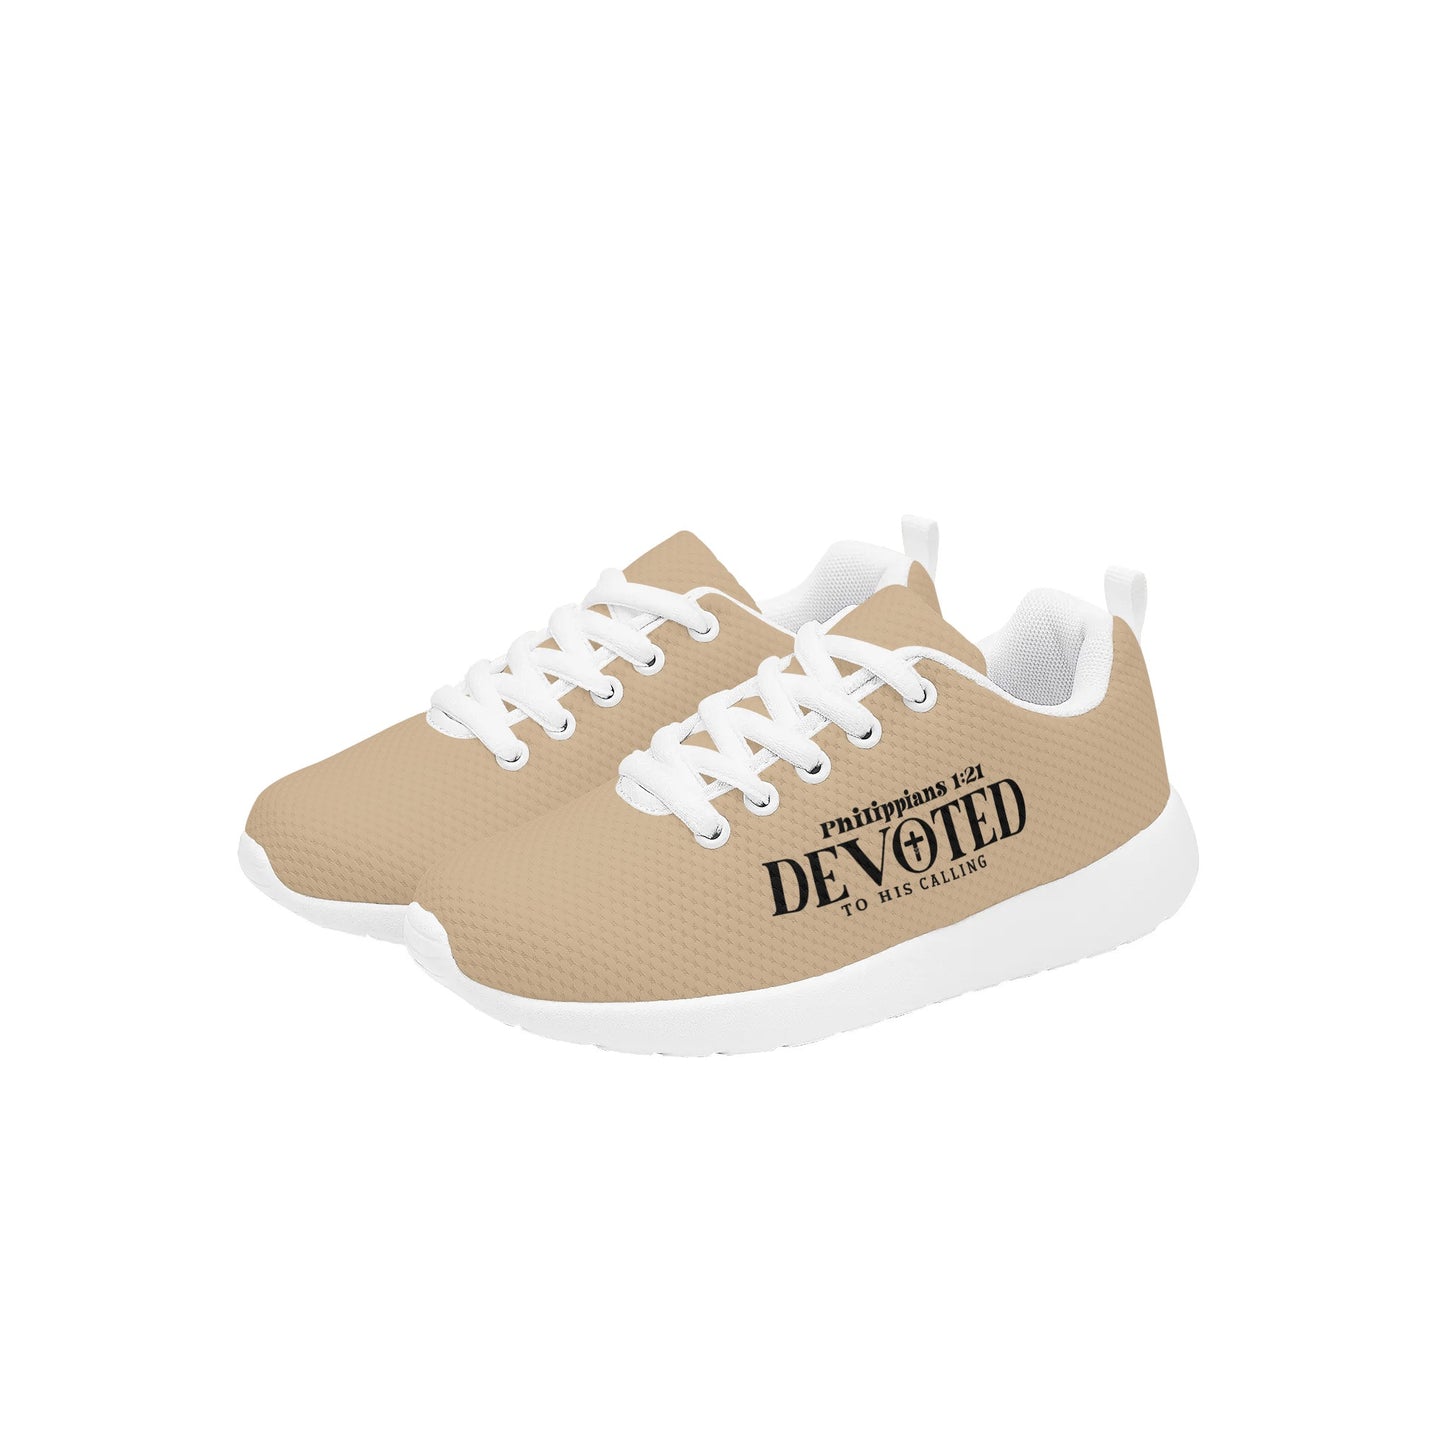 Devoted To His Calling Kids Lace-up Athletic Christian Sneakers popcustoms